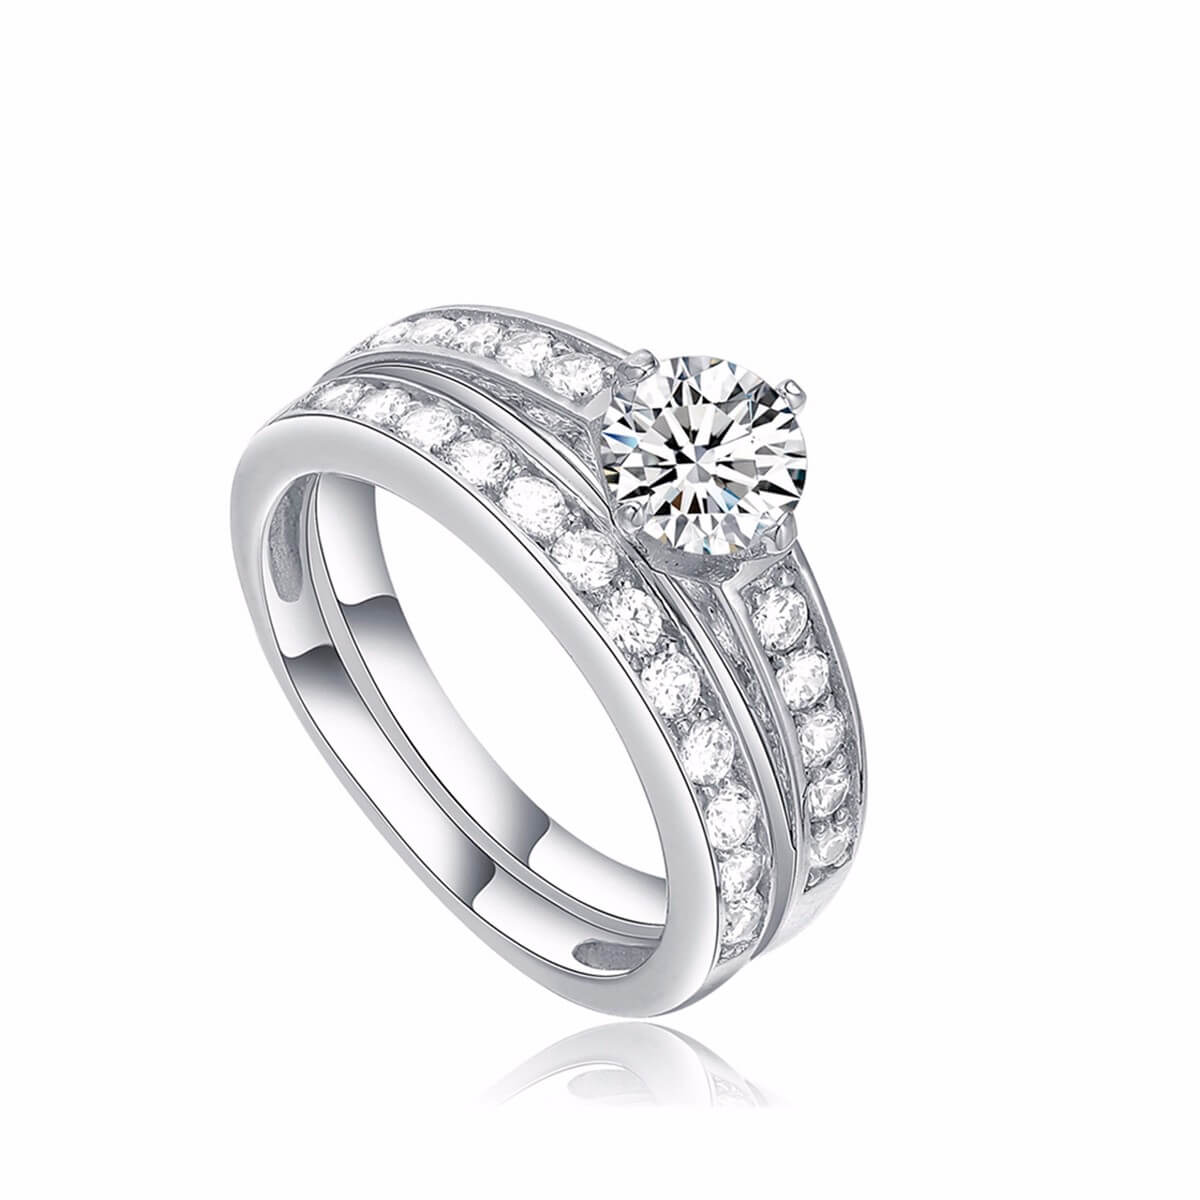 Delicate silver double layer ring, sparkling zirconia brings you a great match